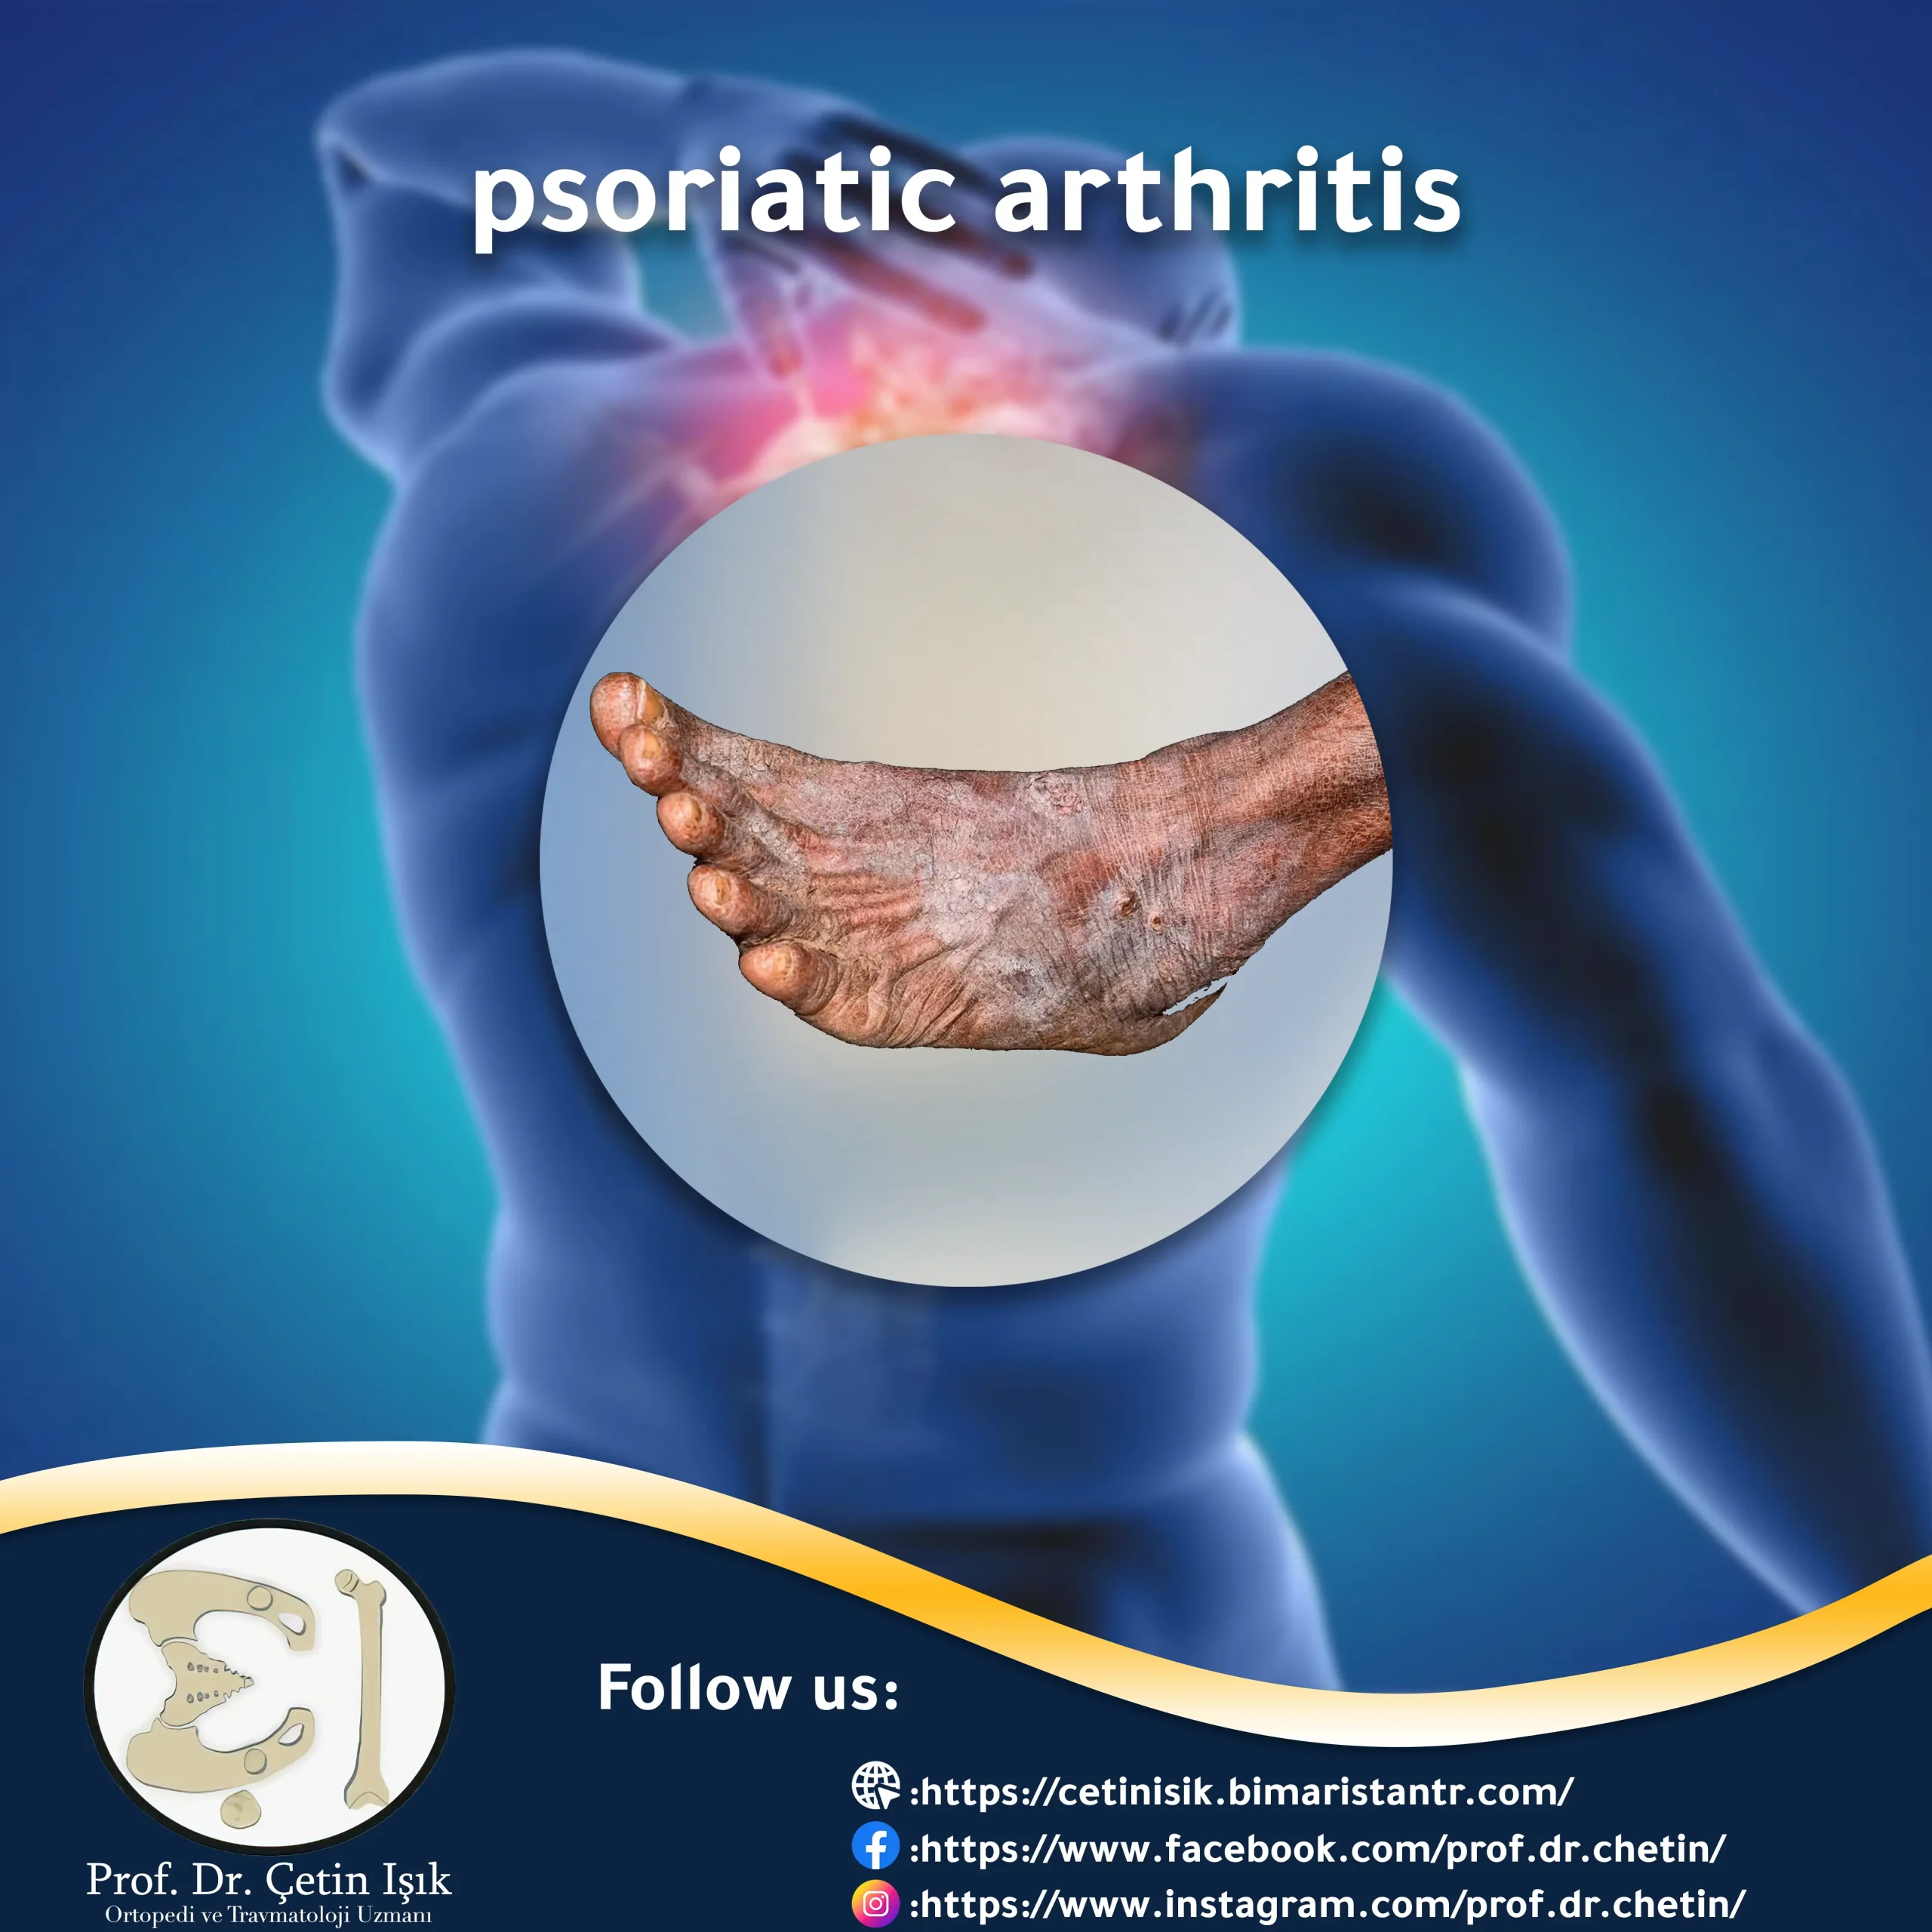 Cover image of the psoriasis article